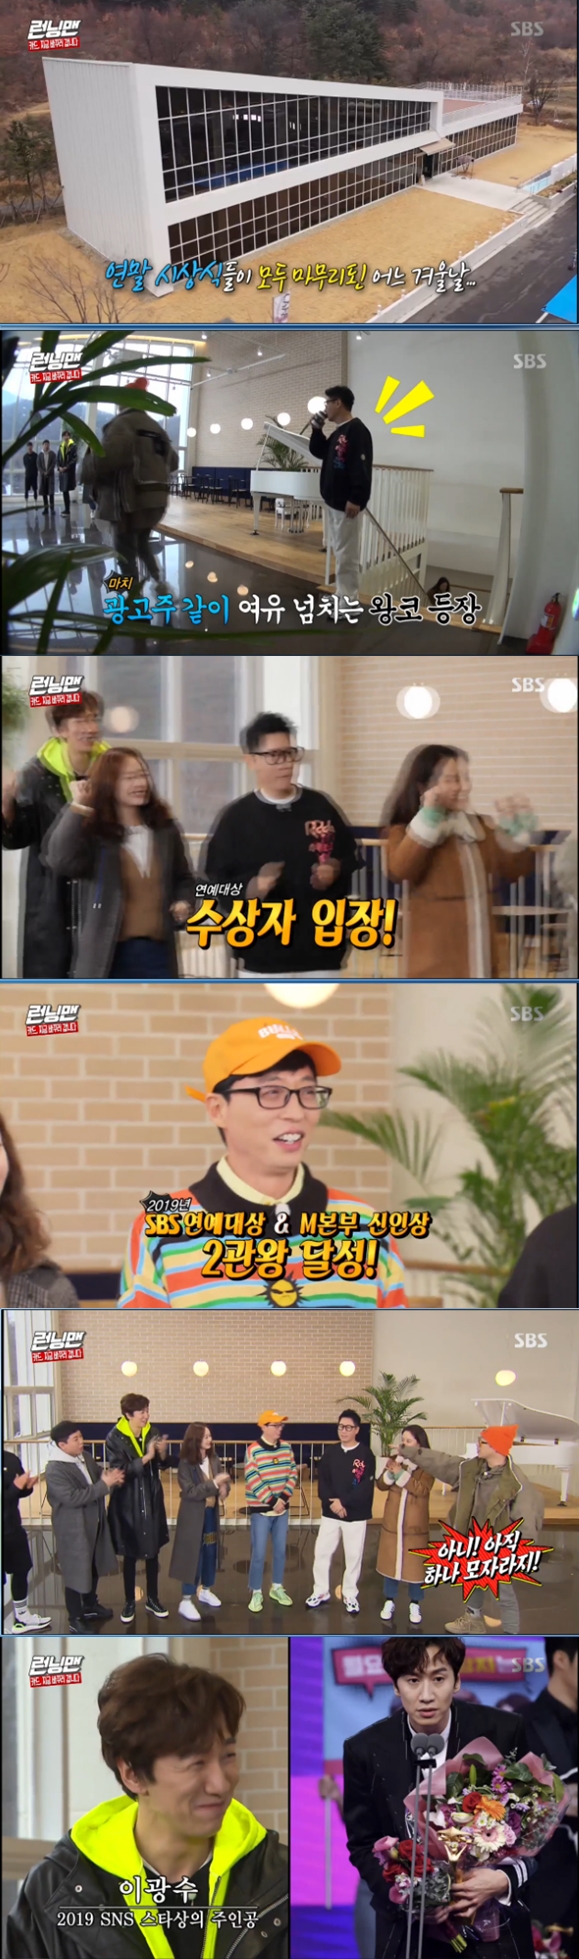 Members celebrated the award of Yoo Jae-Suk.In the SBS entertainment program Running Man broadcasted on the night of the 19th, the members who finished the year-end awards ceremony celebrated each other with the first recording of the new year.The members gathered at the opening place applauded Yoo Jae-Suk when he appeared, saying, Grand prize, New Artist winner.Yoo Jae-Suk said, Now I have completed all the lineup.Haha said, I have not yet filled one prize. He said, I have not received the SNS star award yet.Yoo Jae-Suk teased Lee Kwang-soo, saying he didnt receive a clean One award with the SNS Star Award.Lee Kwang-soo said, I only receive the first name I hear. Thank you for the award, he bowed to viewers.